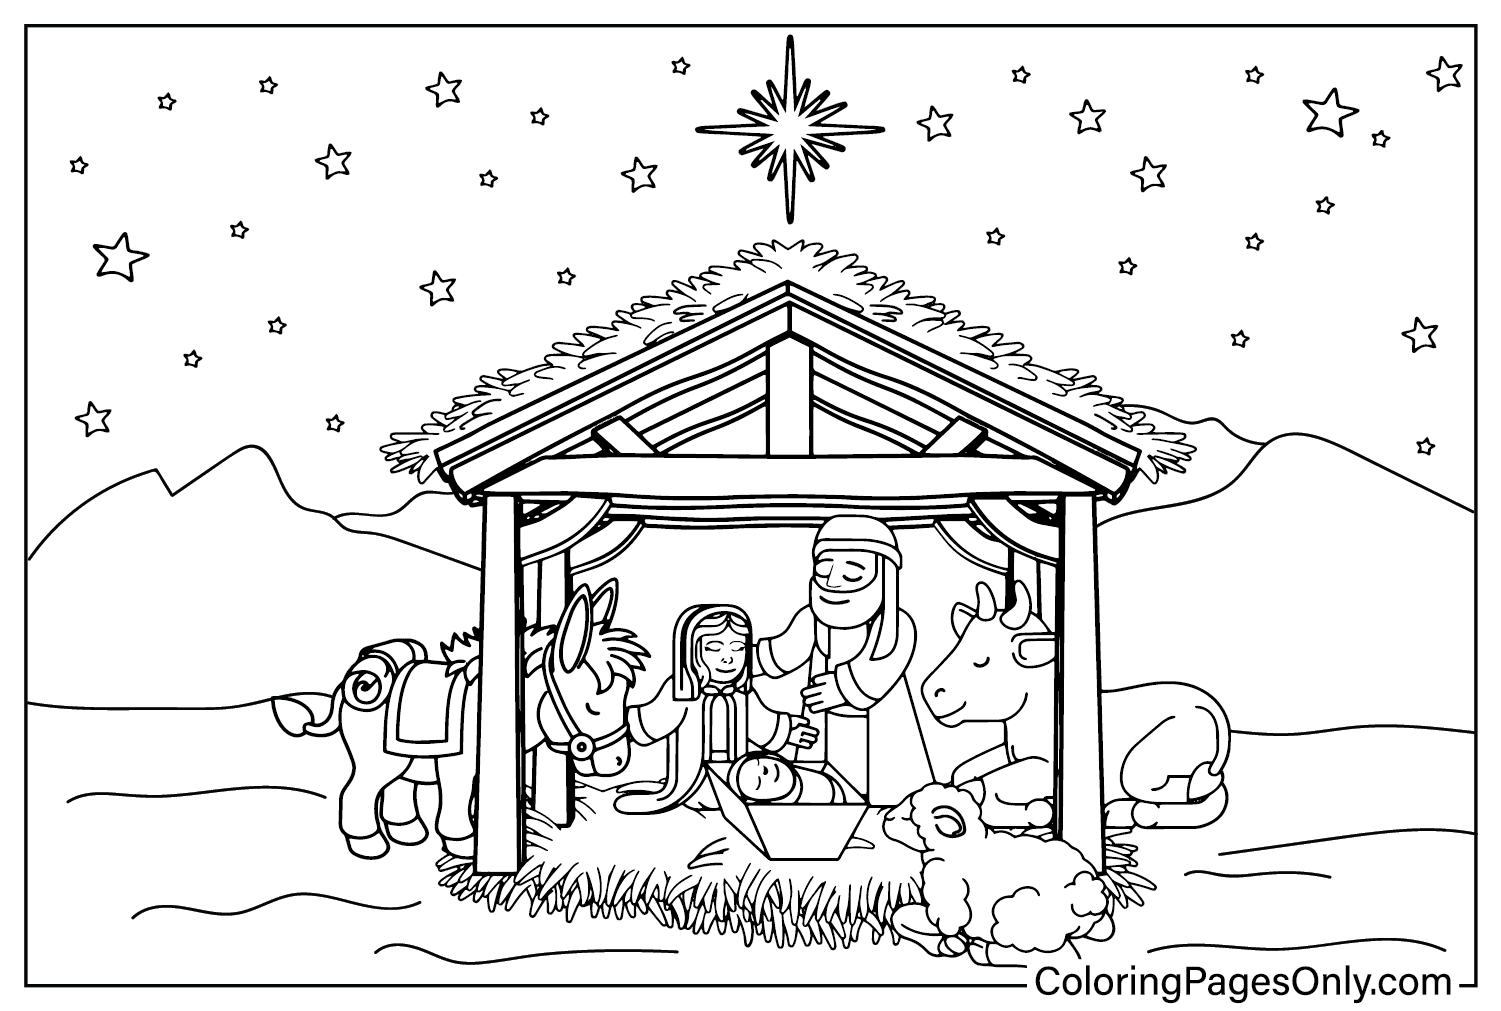 22 Nativity Coloring Pages - ColoringPagesOnly.com